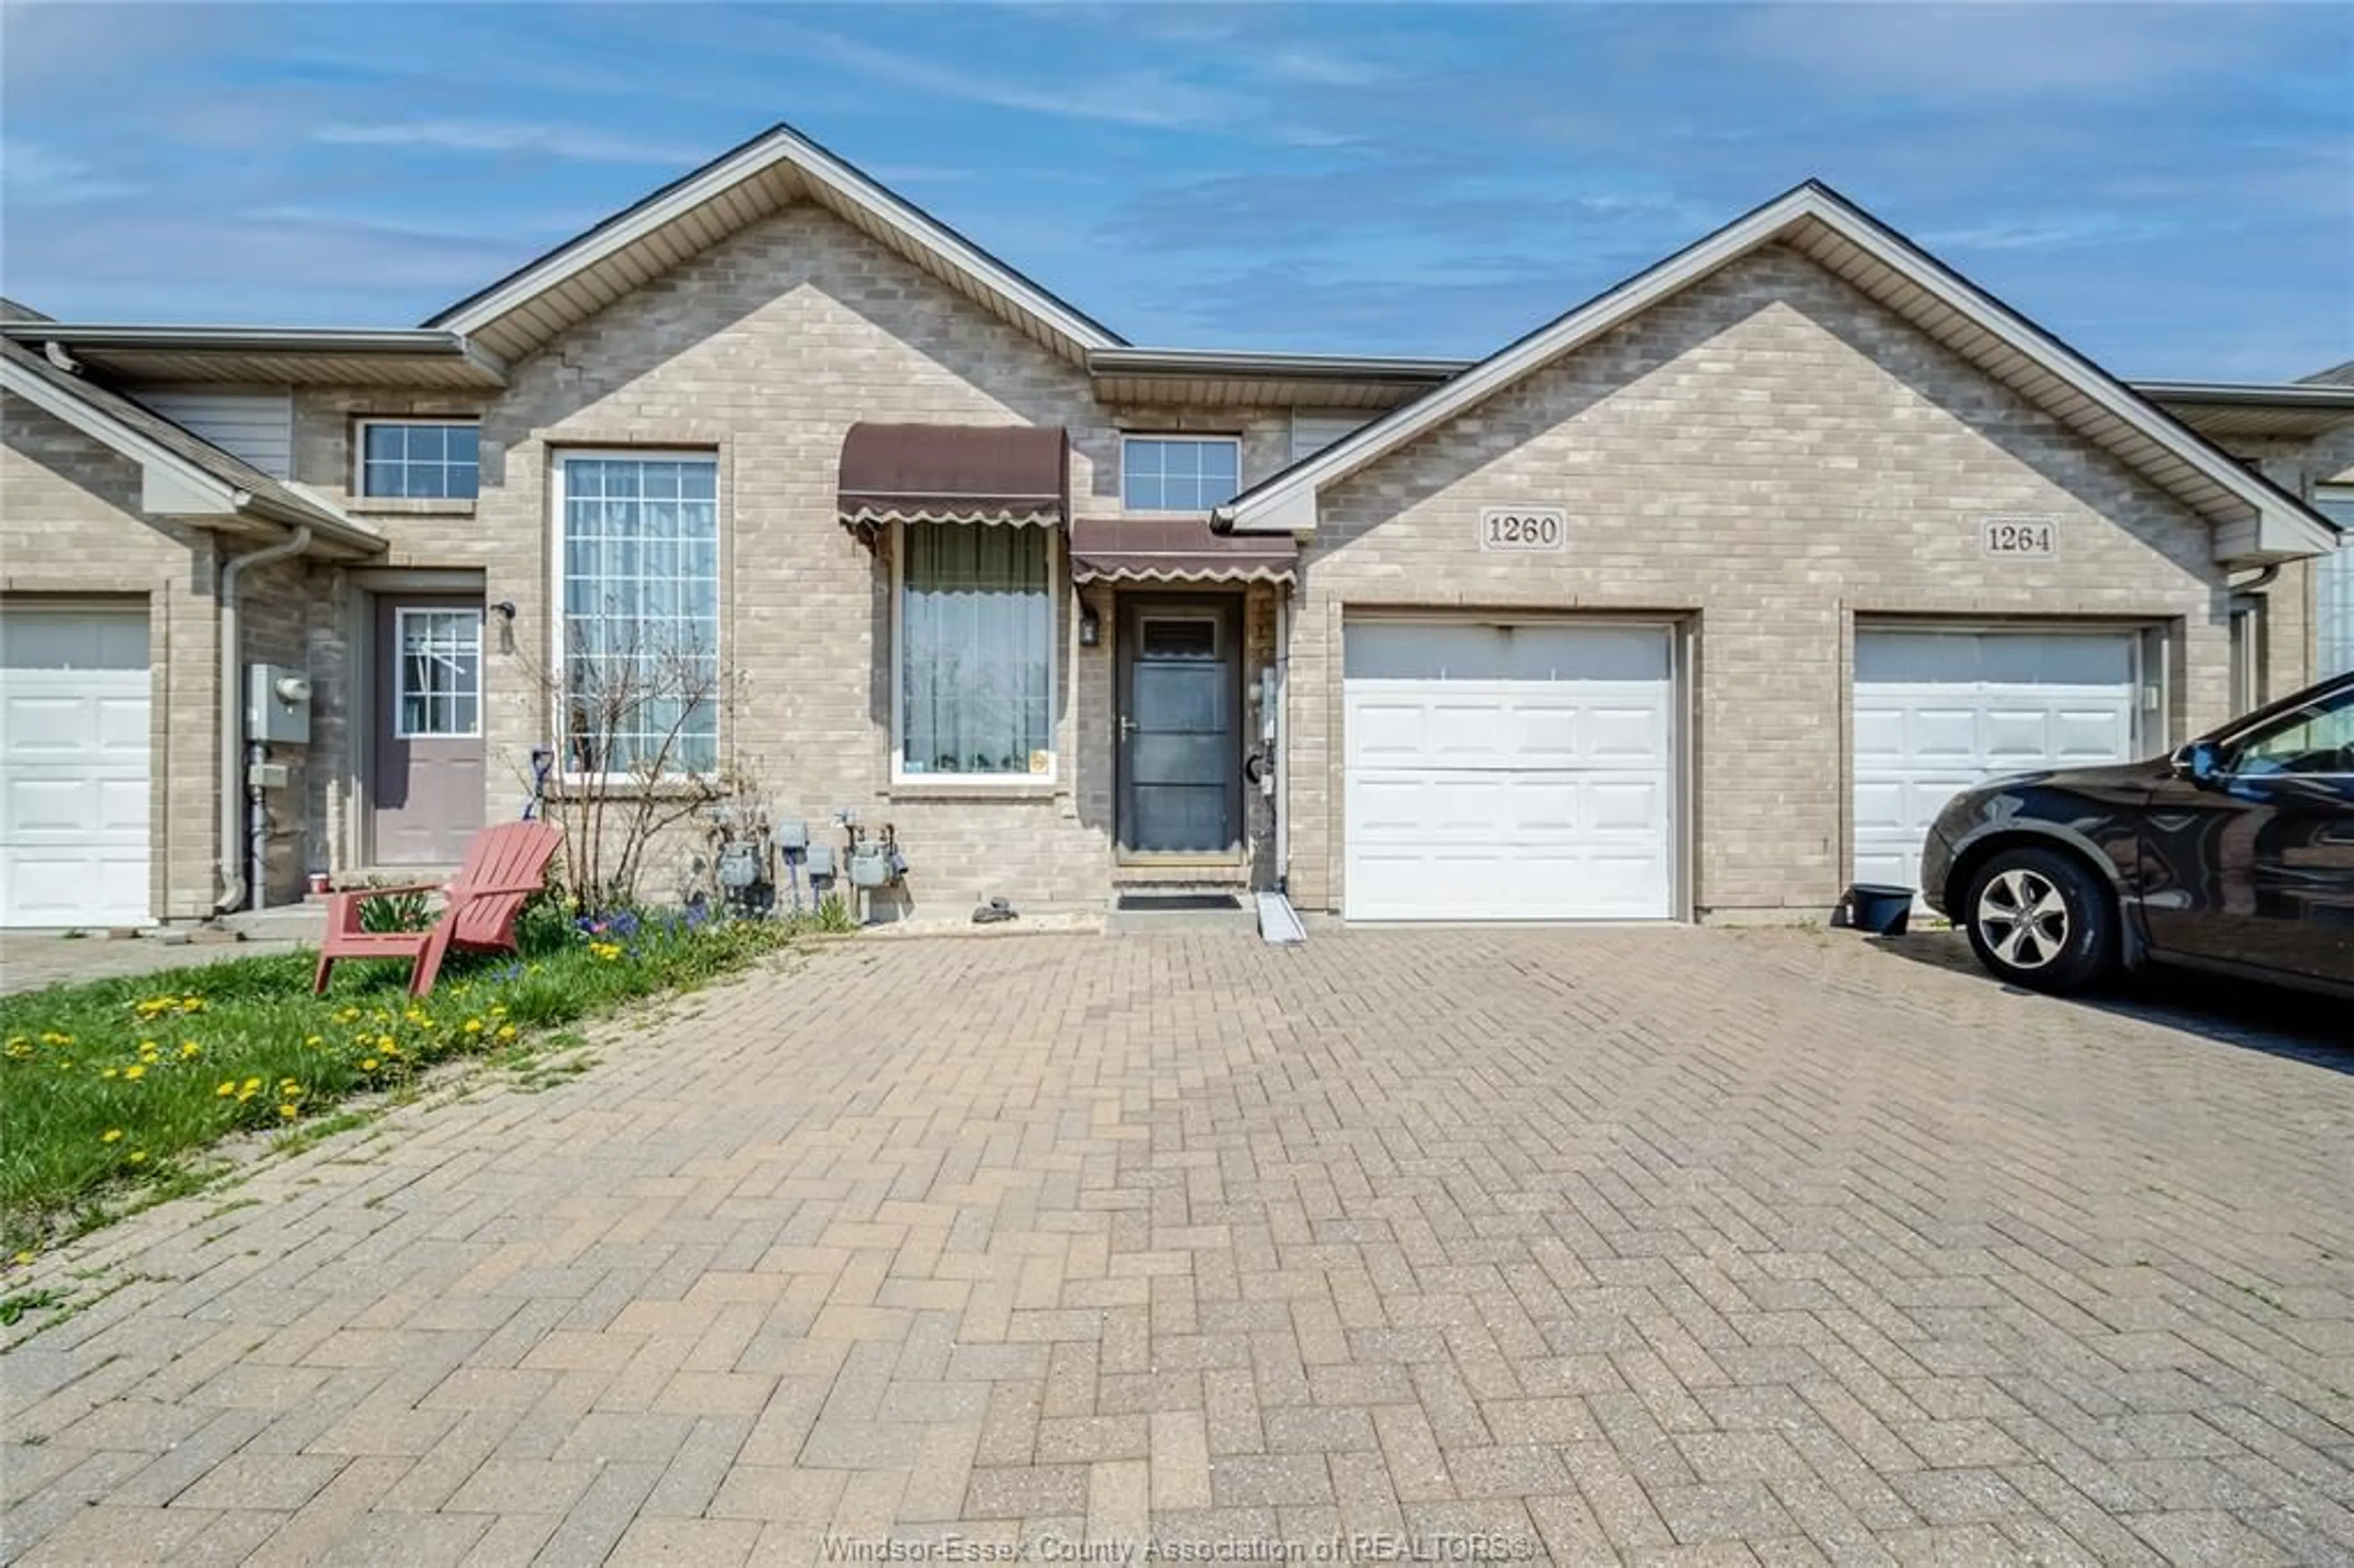 Home with brick exterior material for 1260 SETTLERS St, Windsor Ontario N9G 2W8